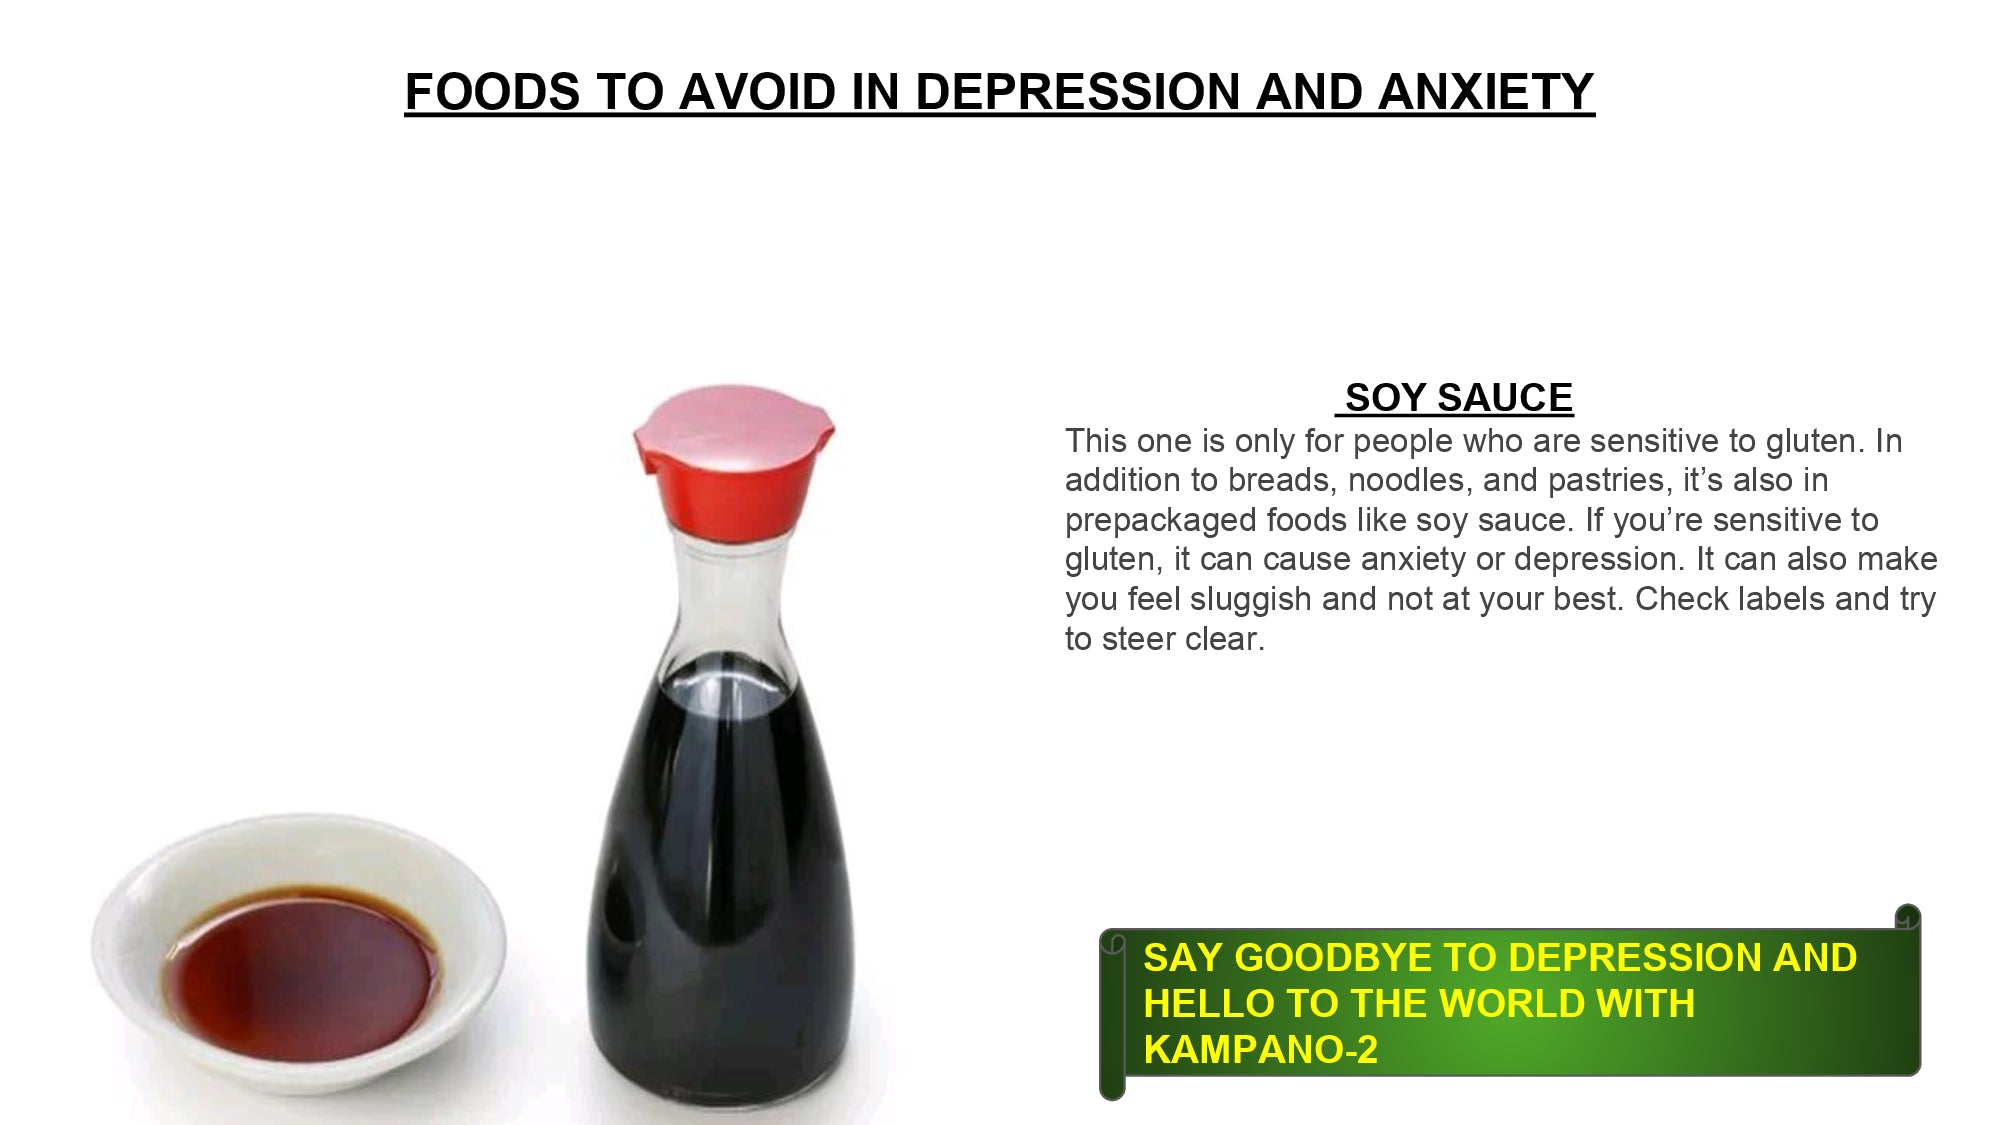 food like soy sauce cause depression 